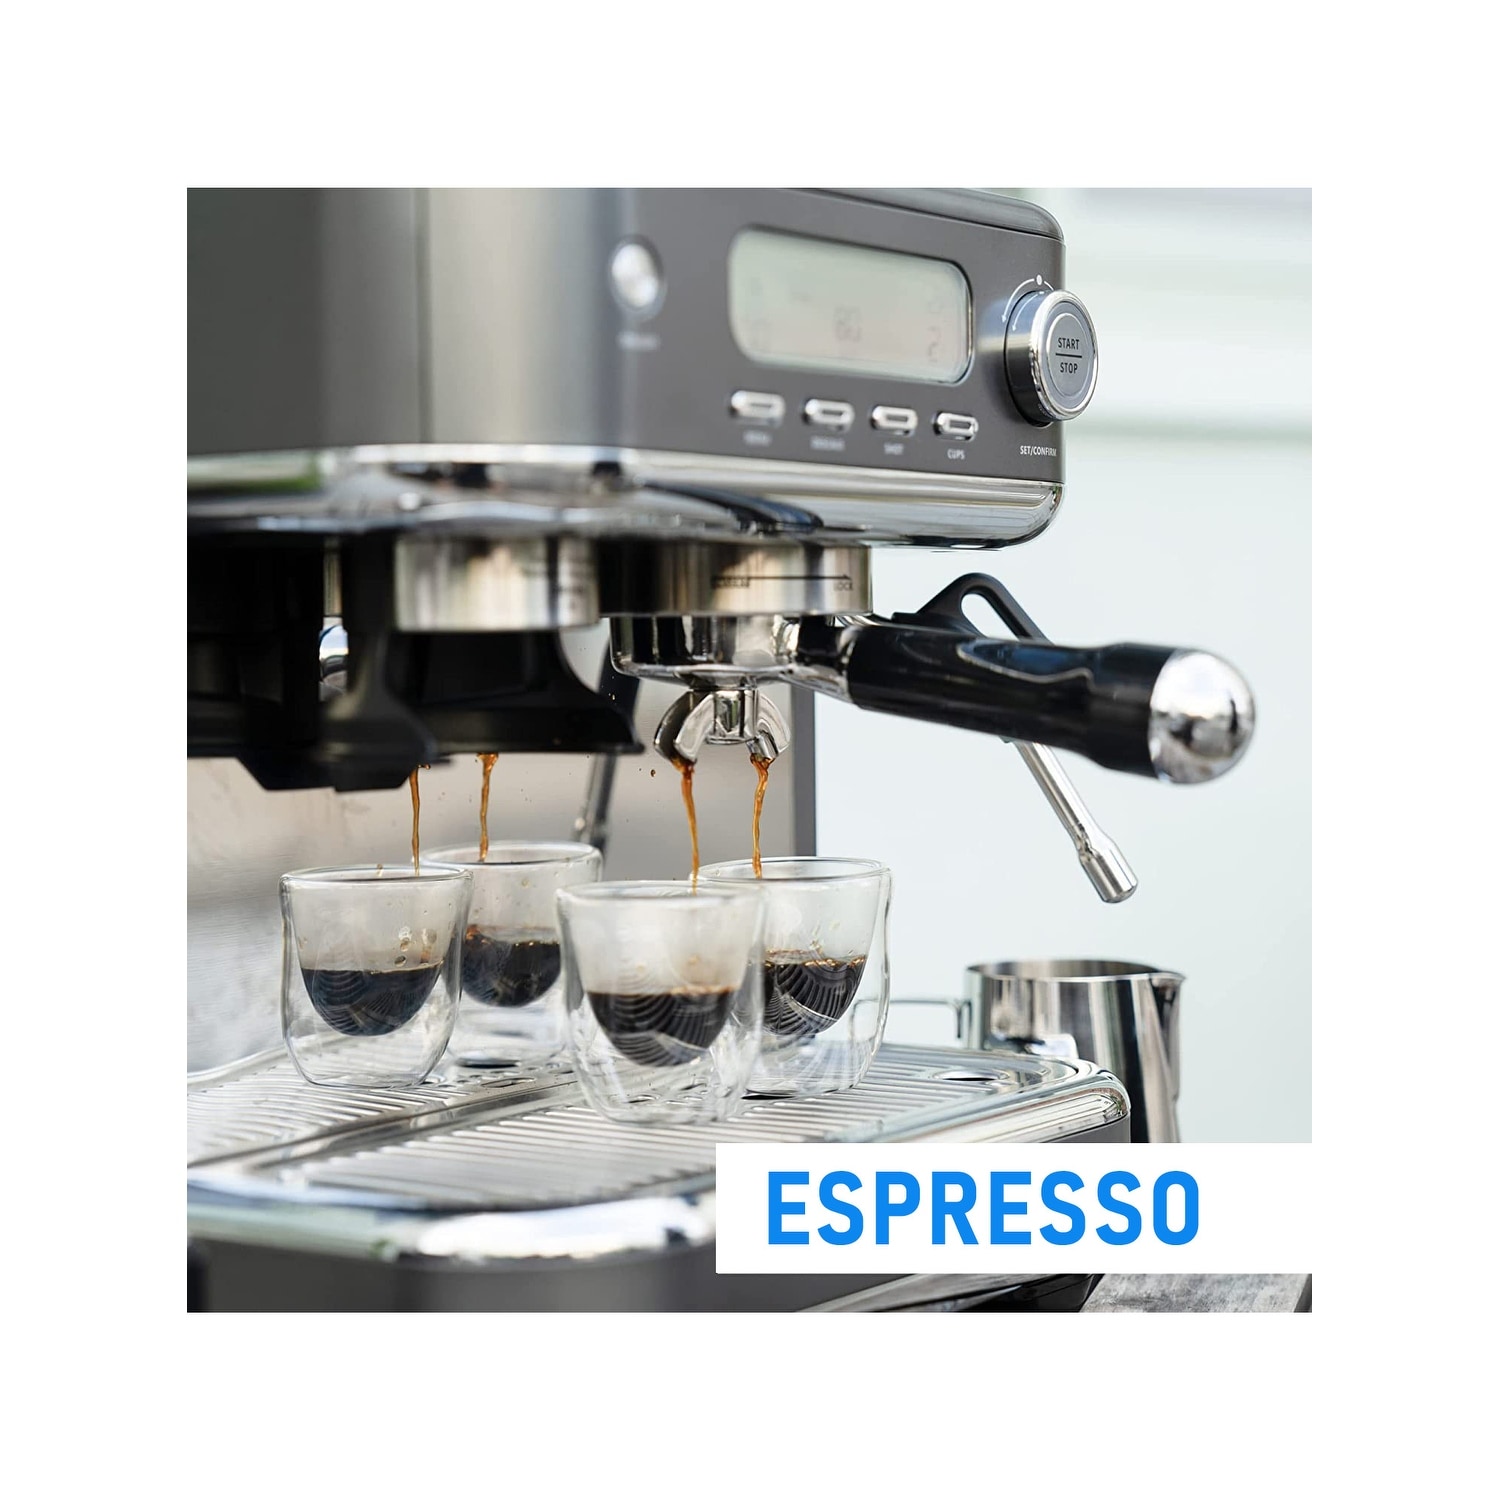 https://ak1.ostkcdn.com/images/products/is/images/direct/0424515eade54581740d09c1c3ac1be22887eaa1/Cyetus-Espresso-Machine-with-Coffee-Grinder-and-Milk-Steam-Wand.jpg